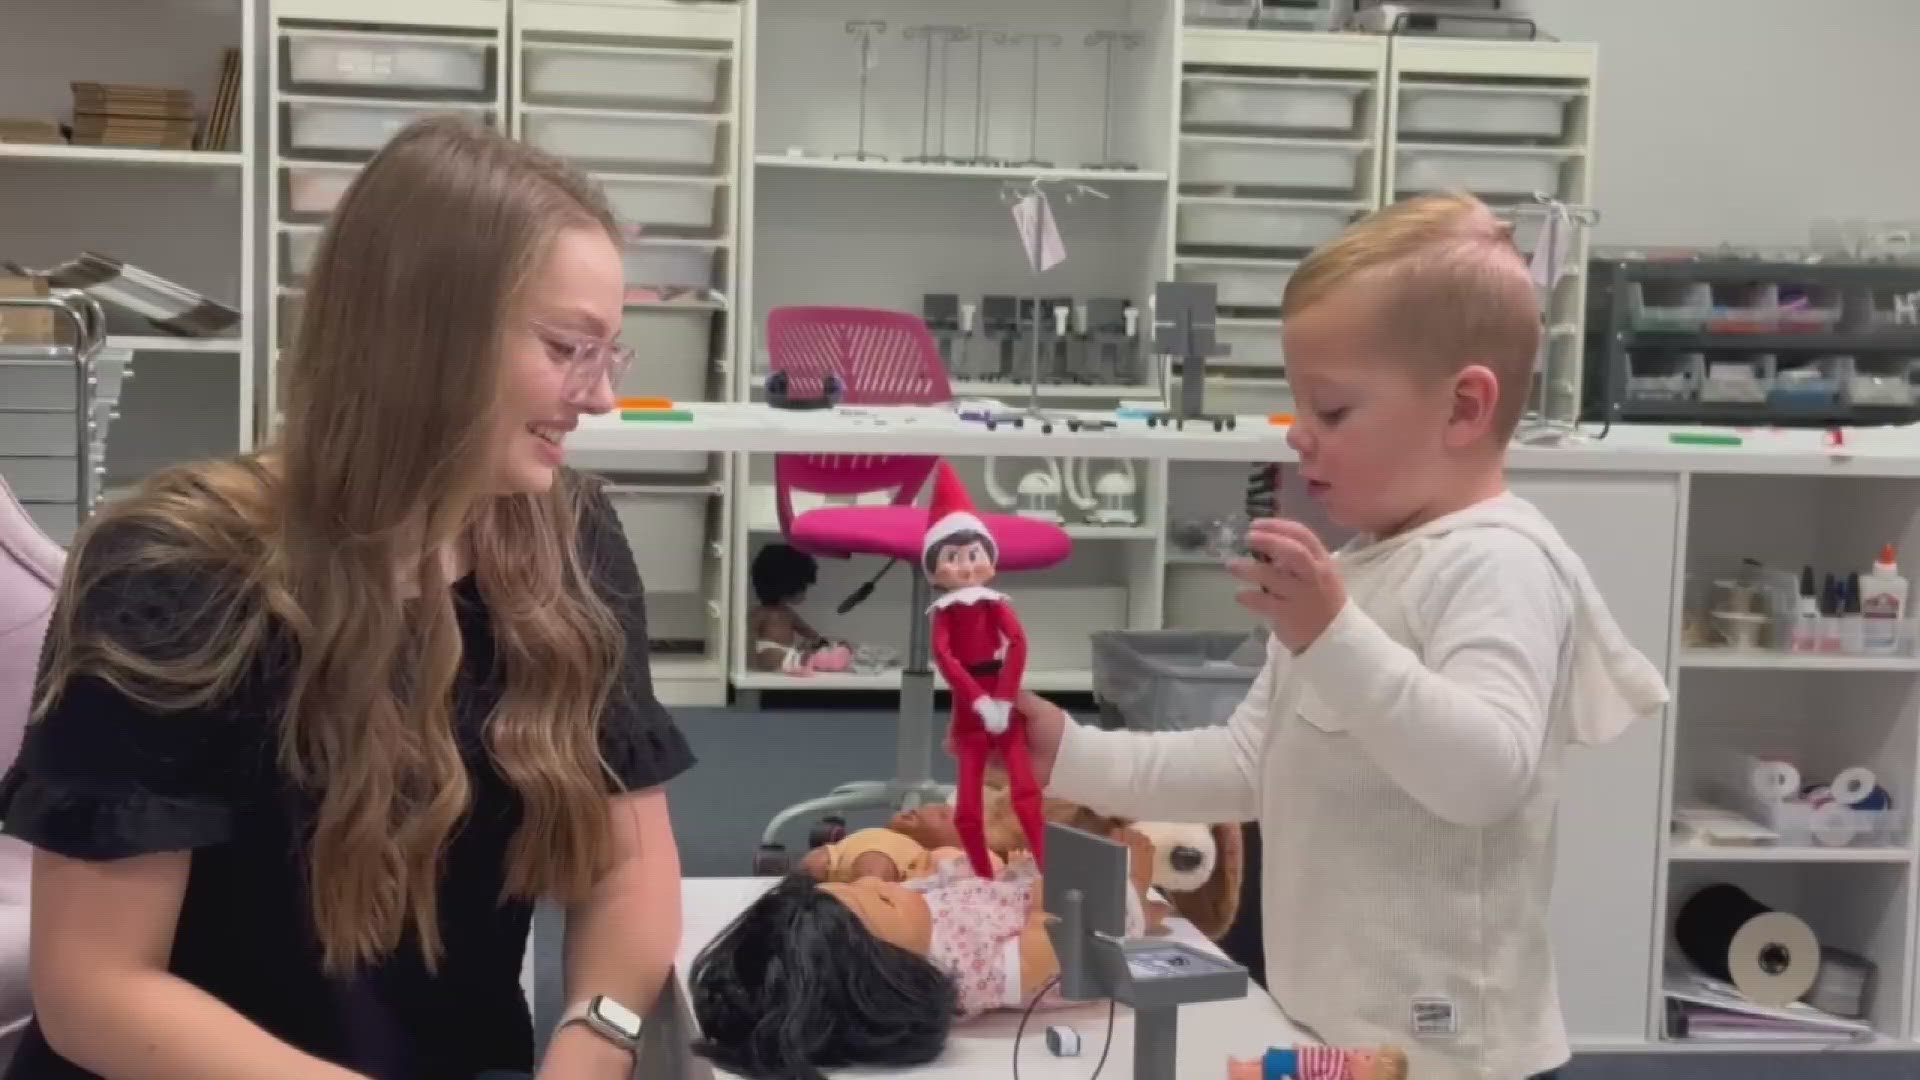 Owner and former pediatric oncology nurse Mary Jenner creates medical themed toys for children who have chronic illnesses or disabilities.